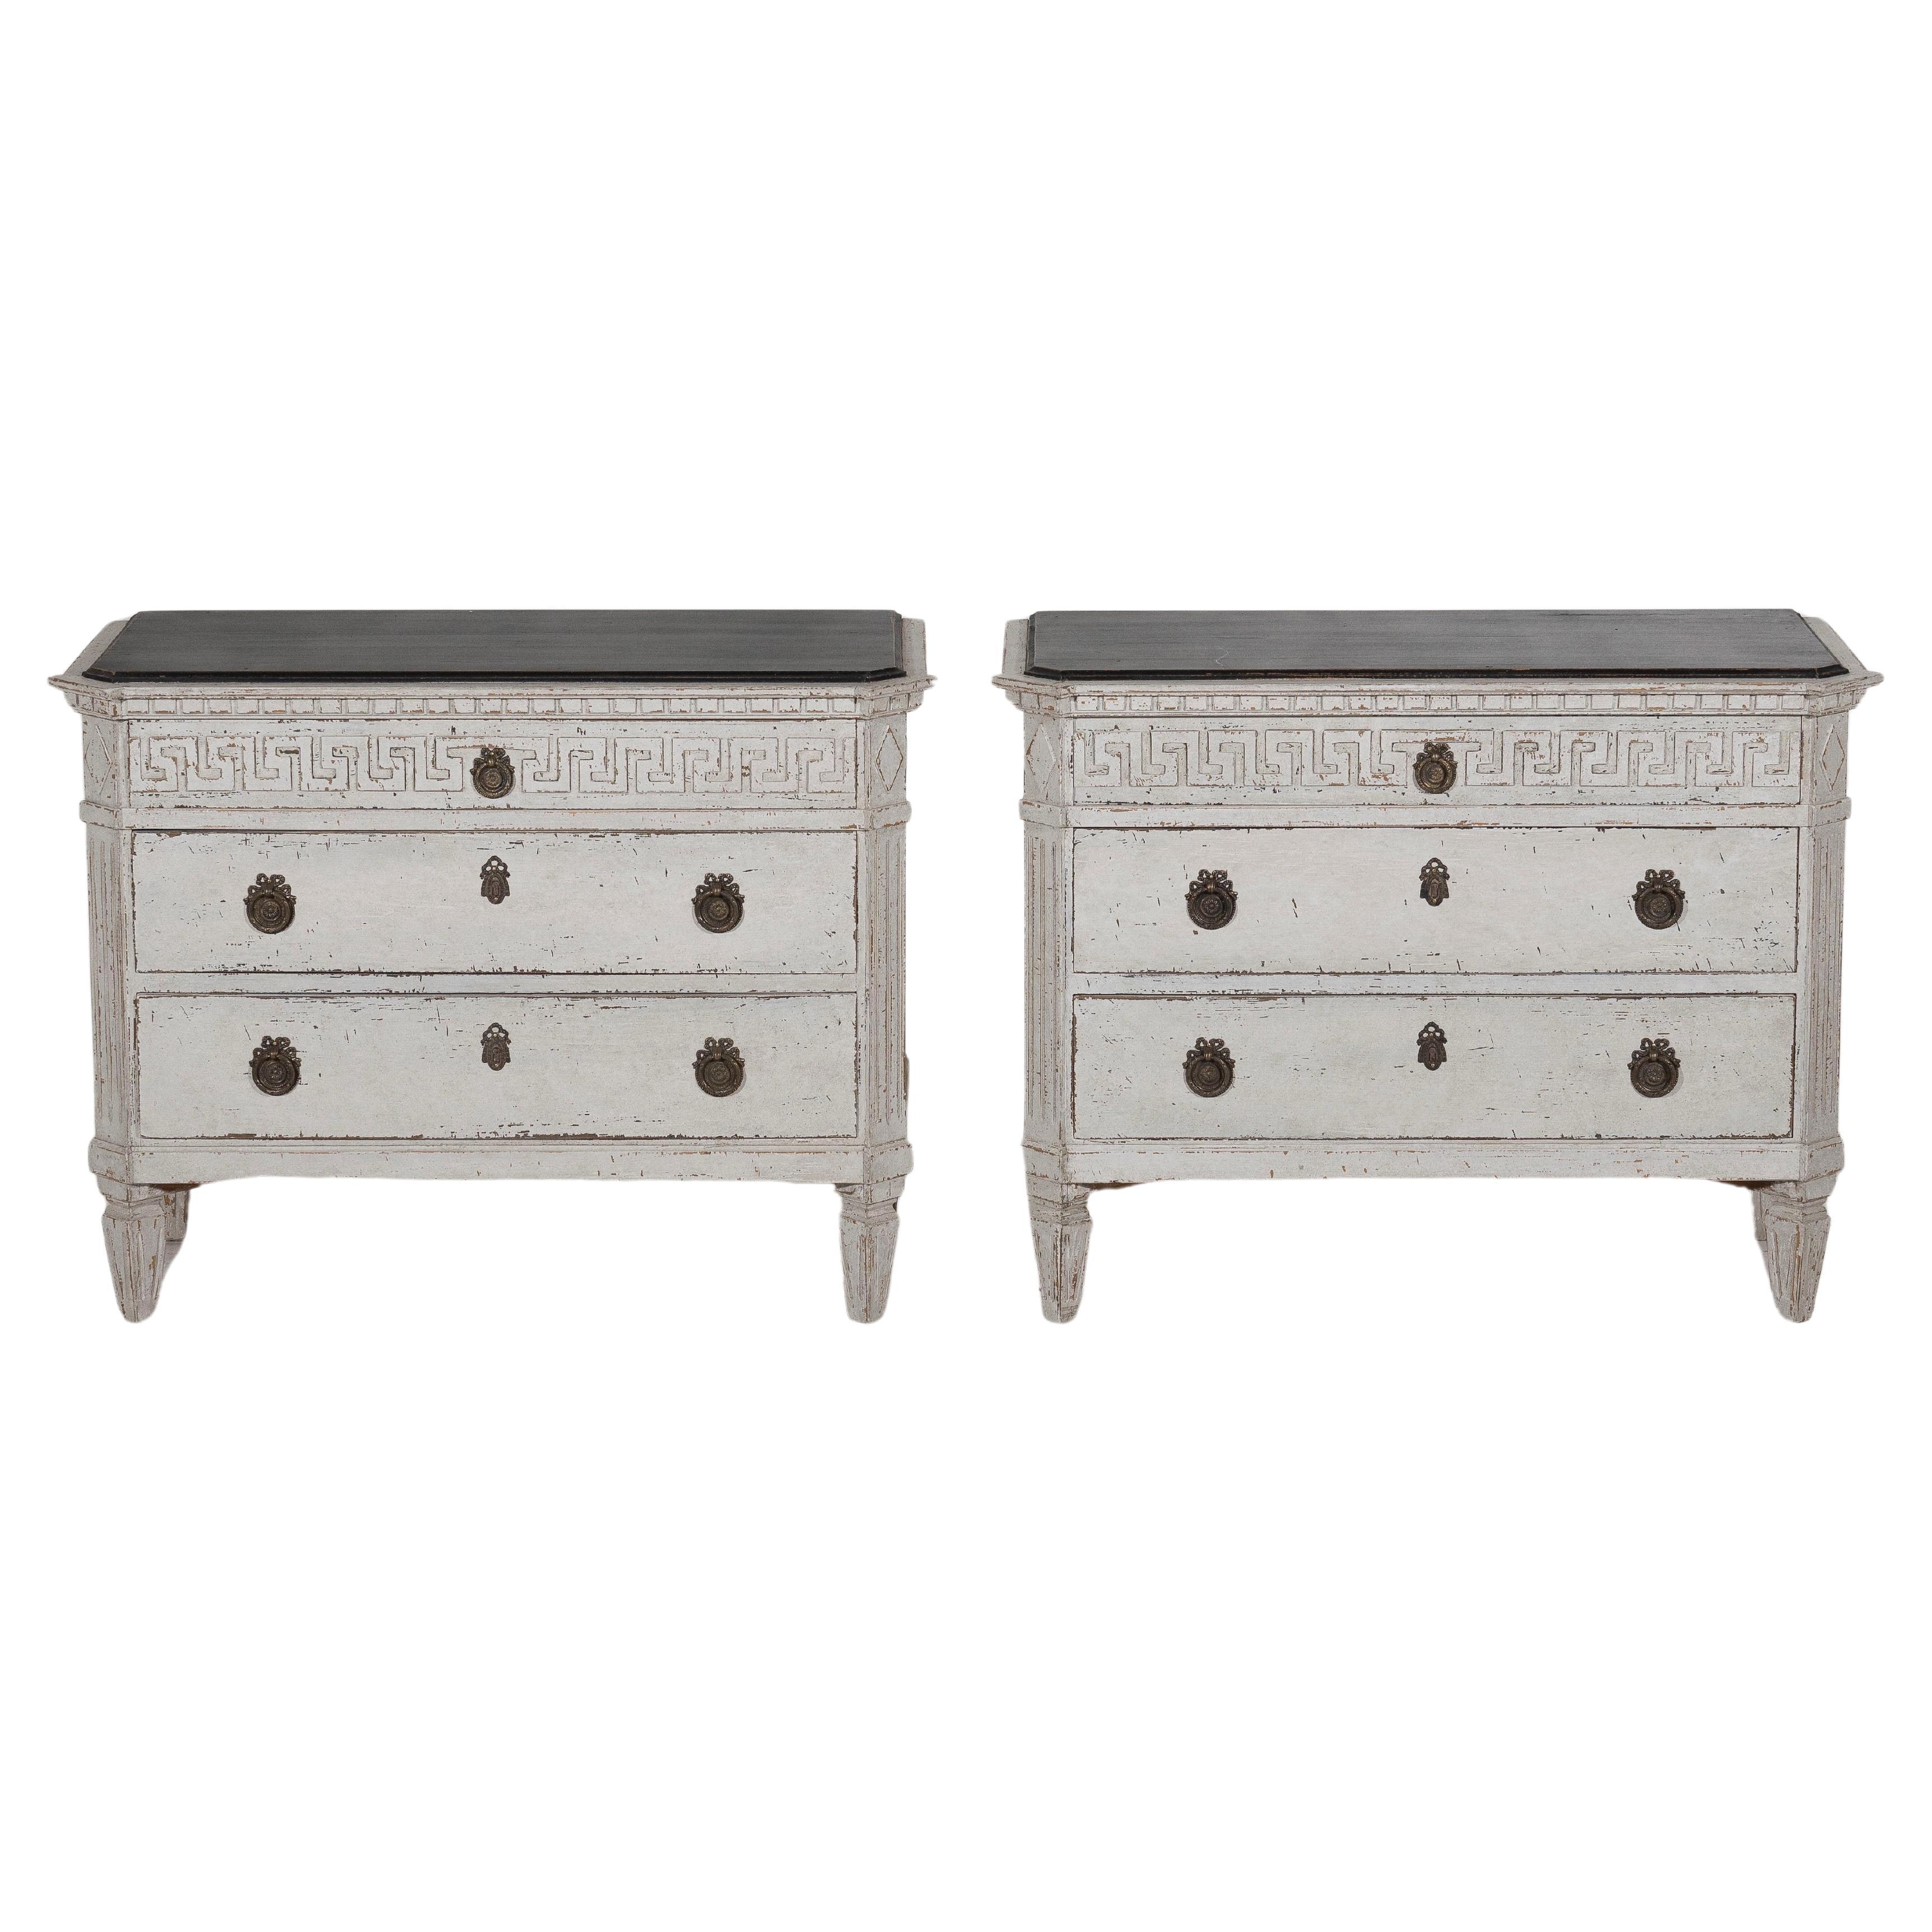 Pair of Gustavian chests, from around 100 years old. For Sale